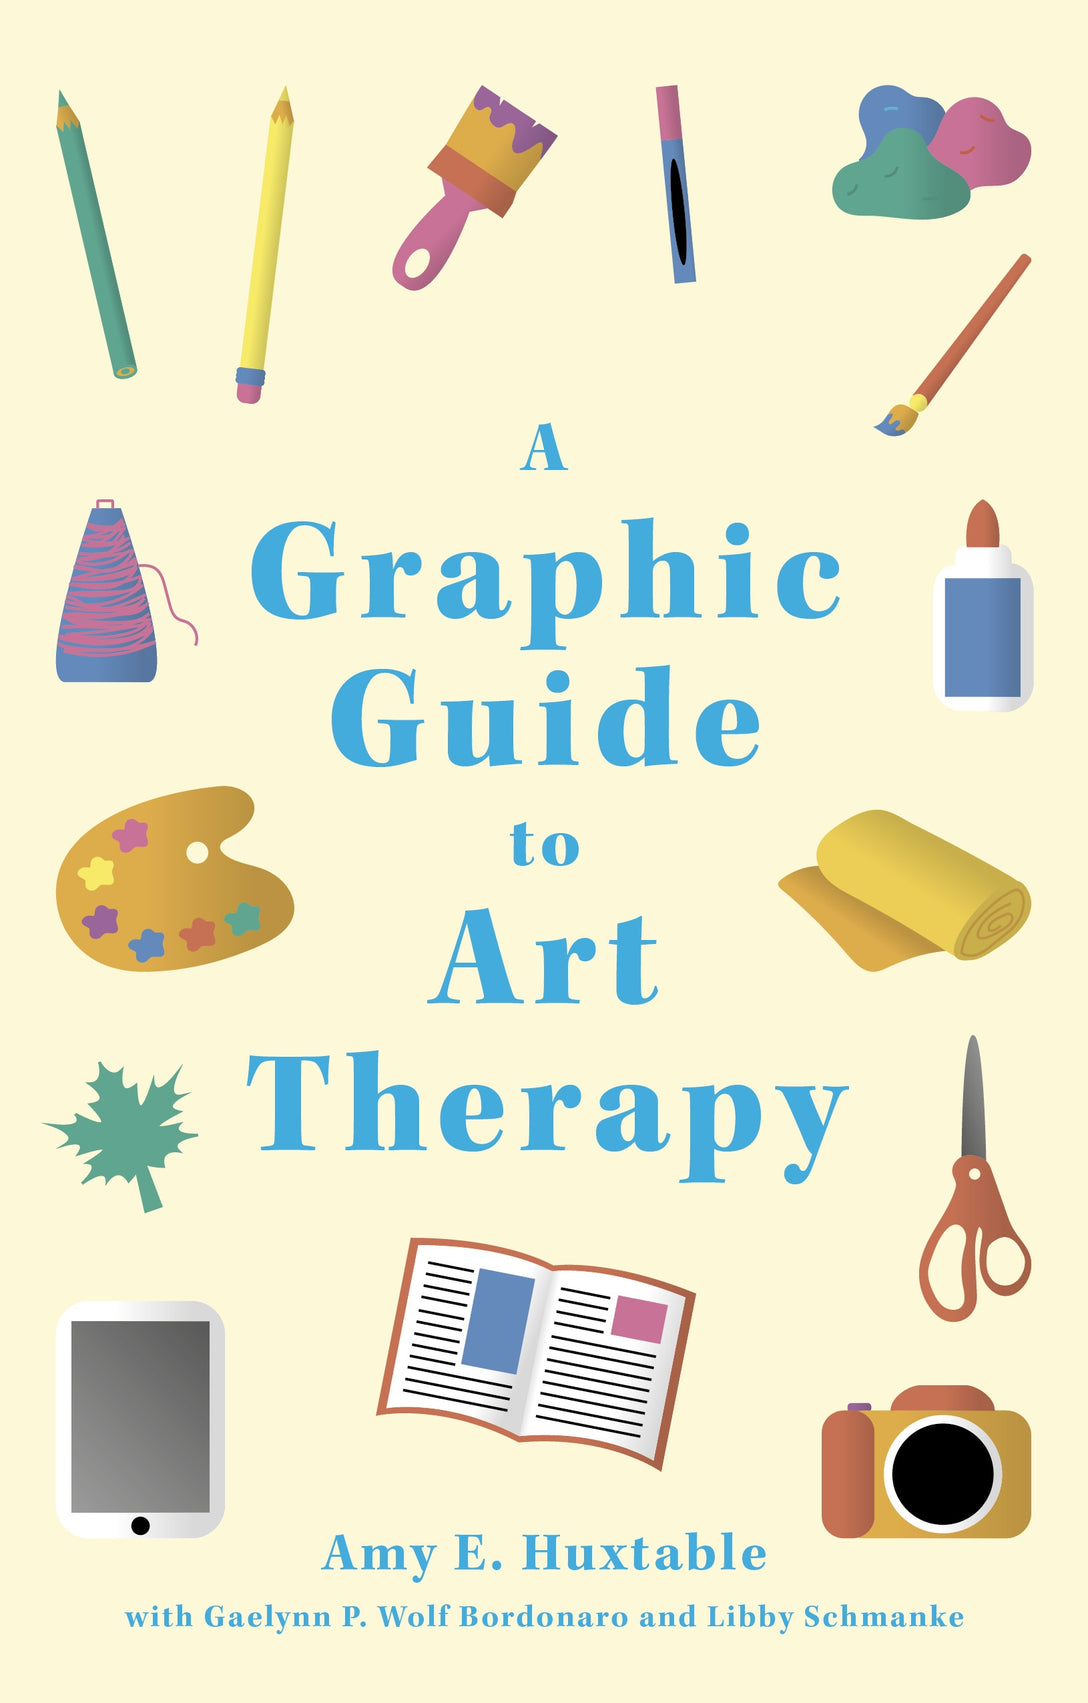 A Graphic Guide to Art Therapy by Gaelynn P. Wolf Bordonaro, Libby Schmanke, Amy E. Huxtable